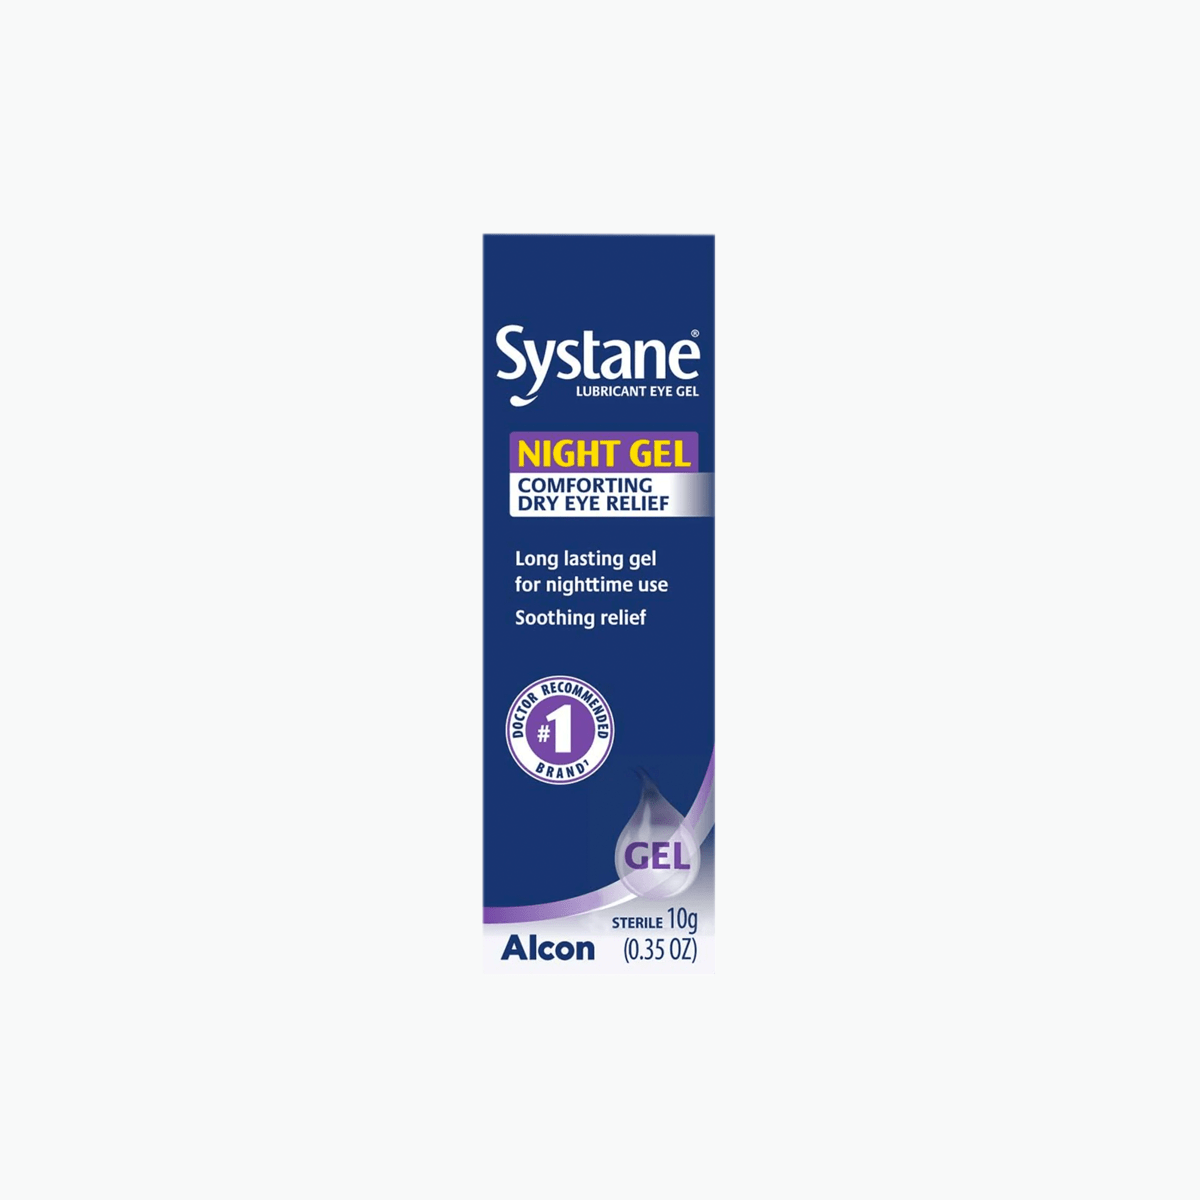 Systane Night Gel for Comforting Dry Eye Relief at Nighttime (10g / .35oz) - Dryeye Rescue